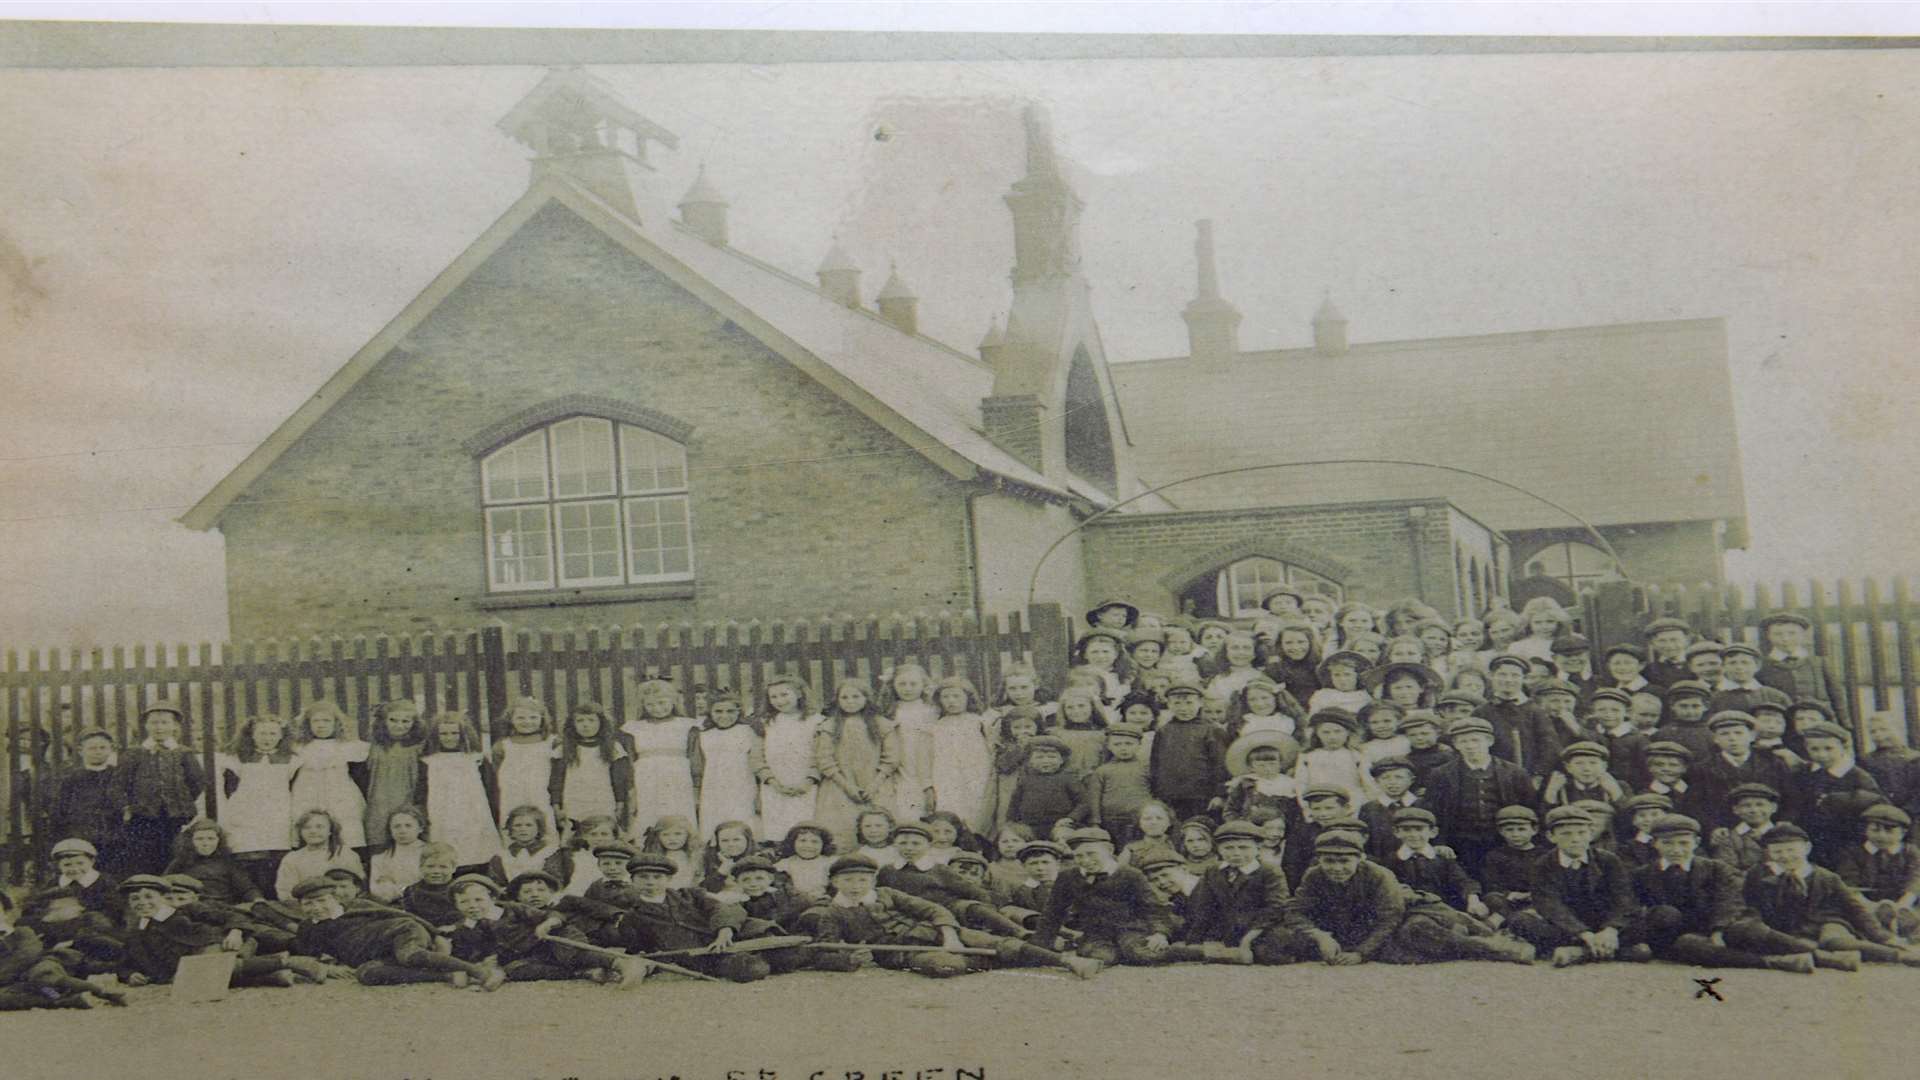 Green Street Green School, shortly after it was opened.